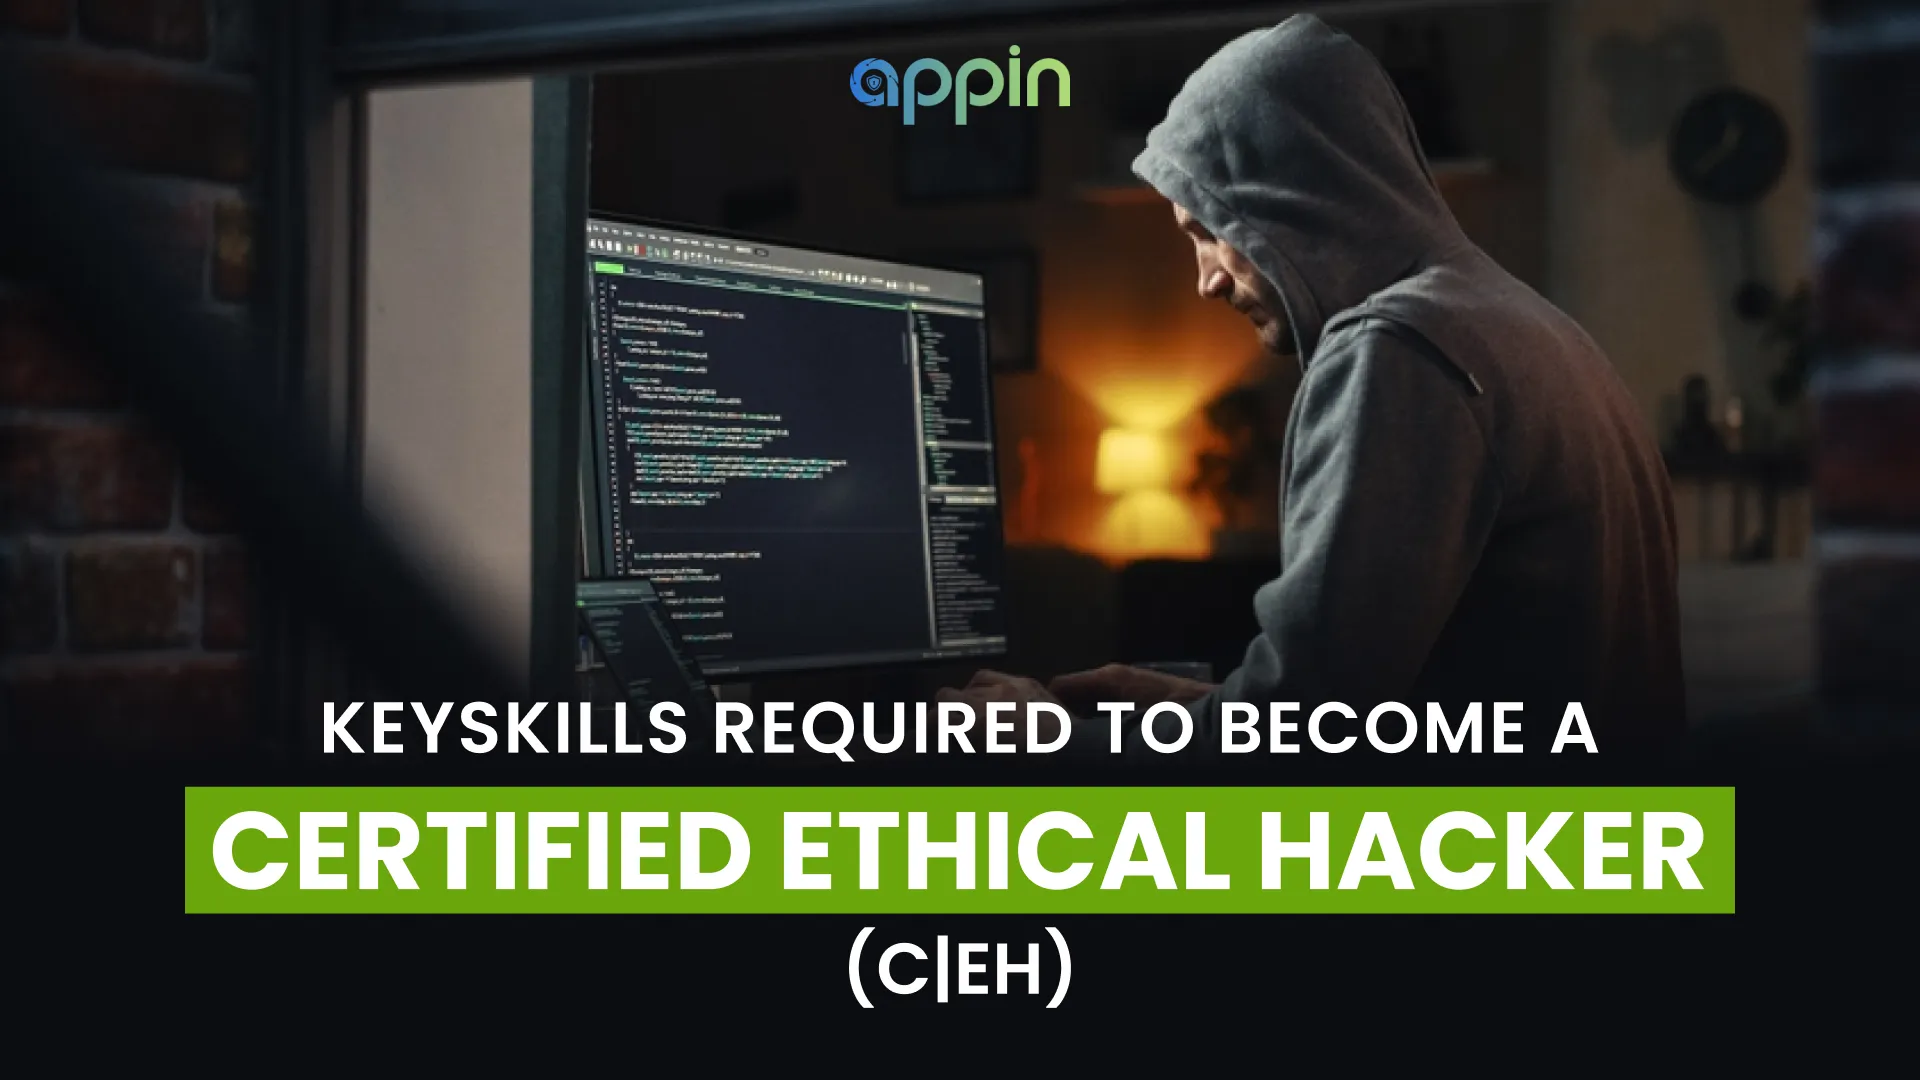 Keyskills required to become a certified Ethical Hacker (C|EH)